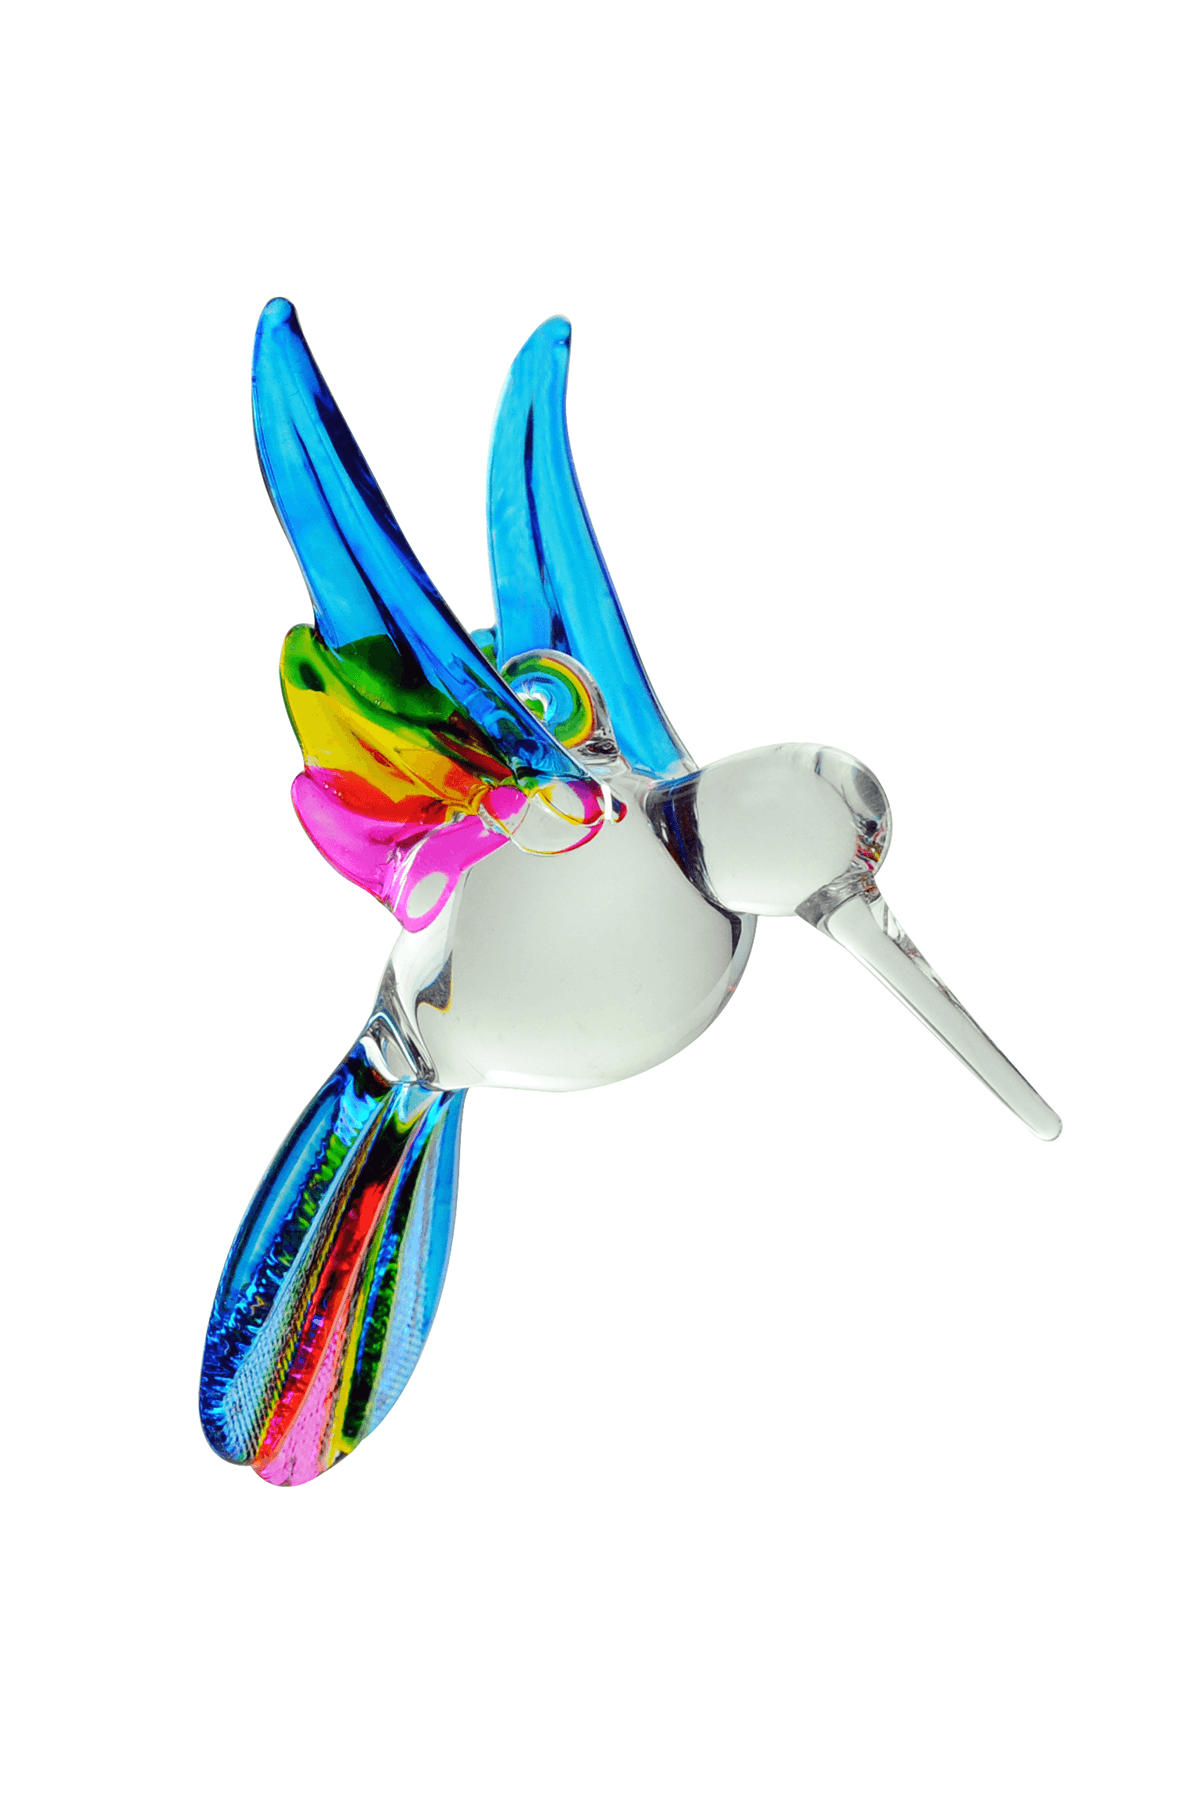 Crystal Castle Glass Multi-Colored Hummingbird ornament in Blue with Yellow and Pink accents.